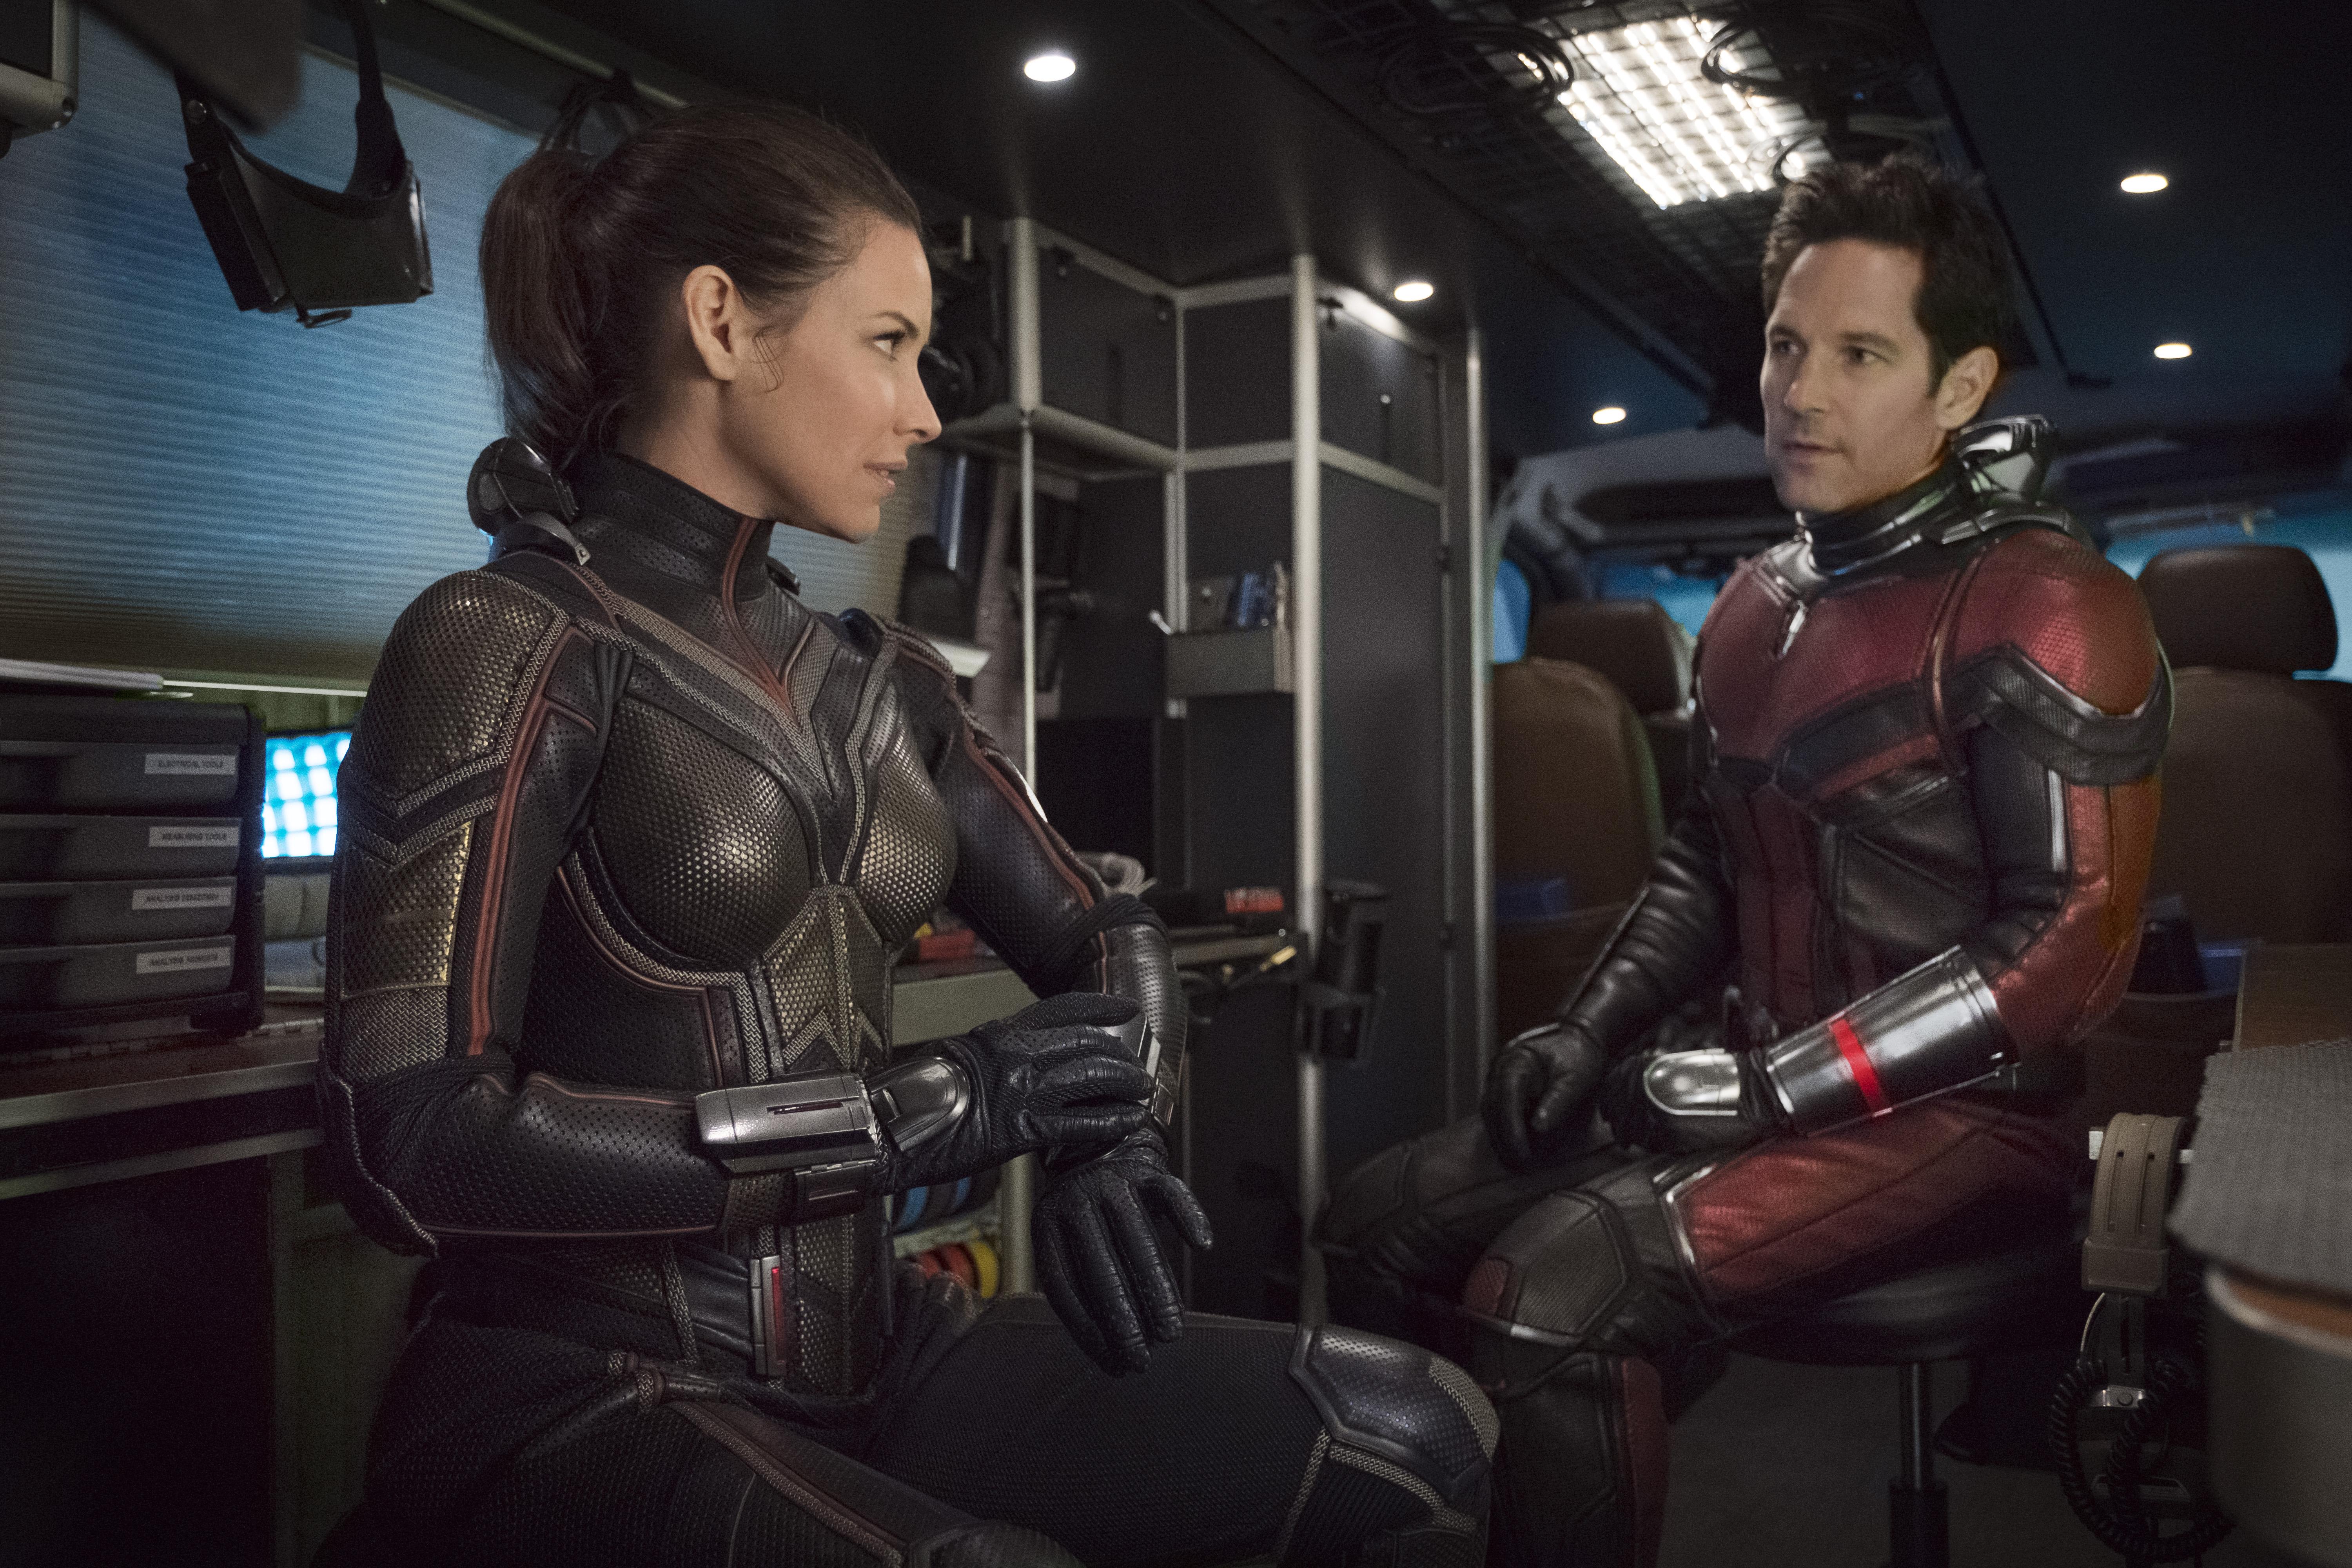 Ant Man And The Wasp High Res Image. Cosmic Book News